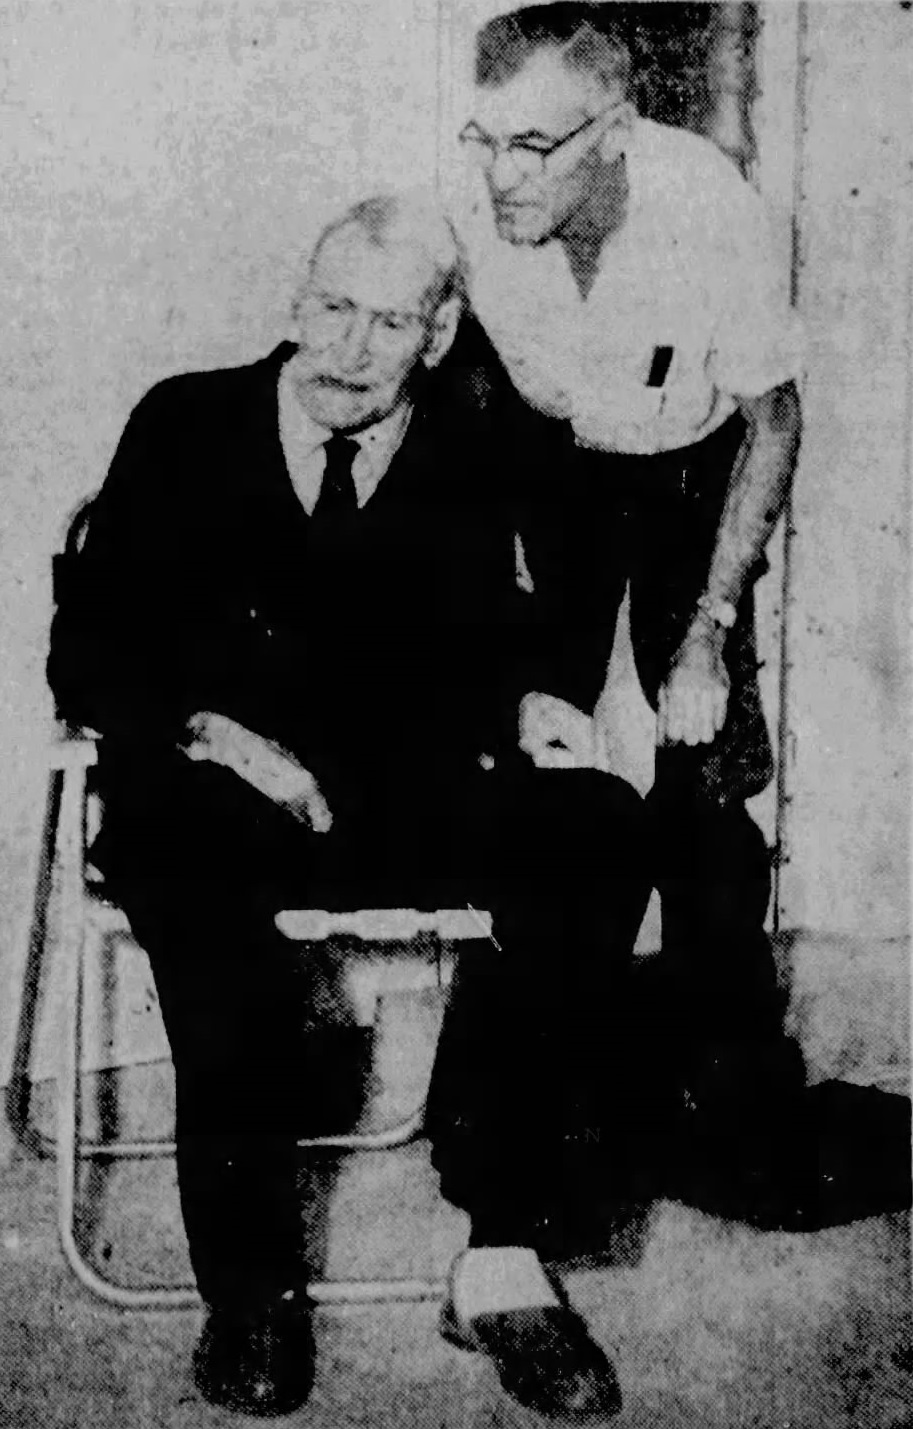 On his 111th birthday in 1960. (Source: The Lexington Herald)